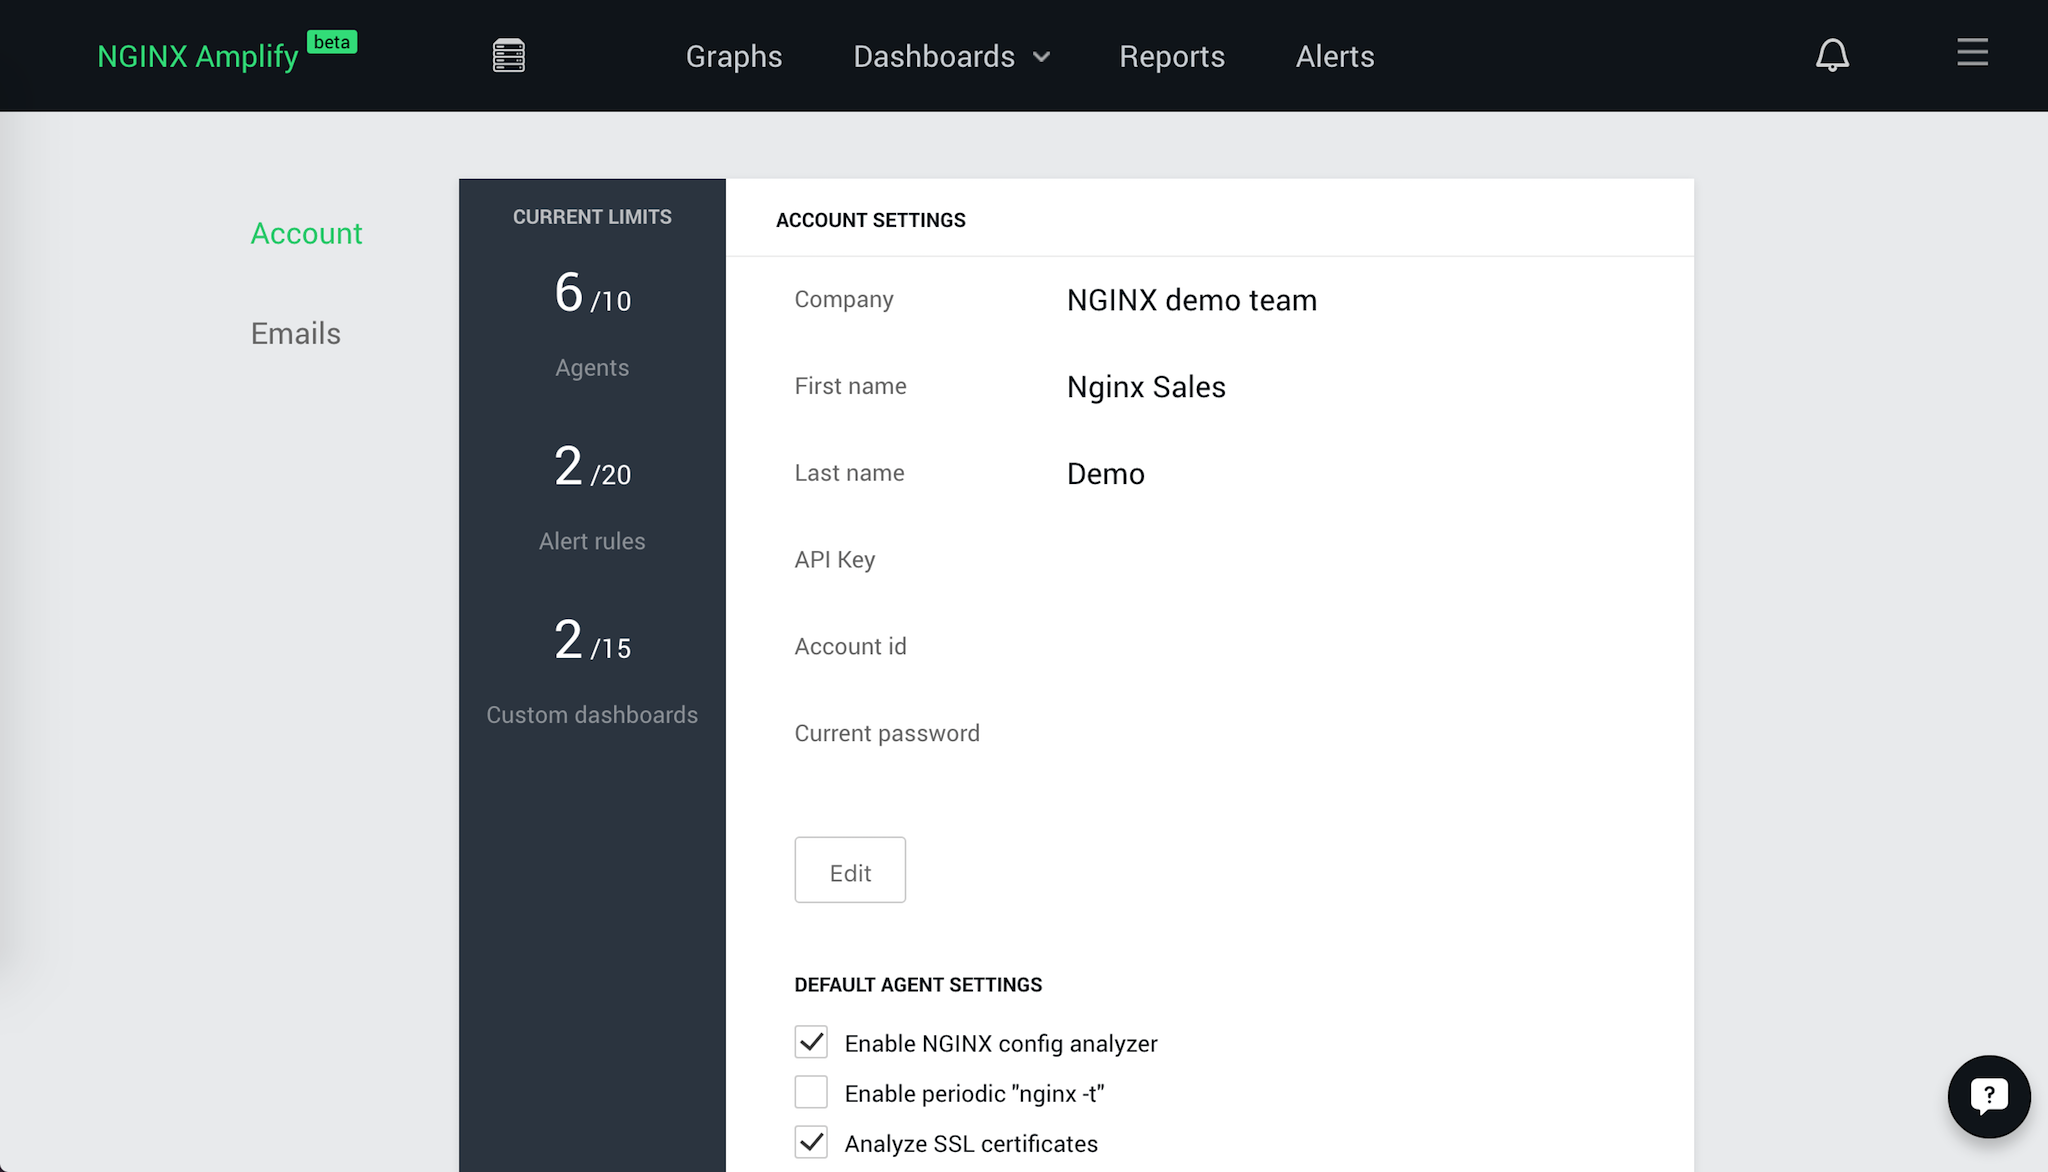 The 'Account Settings' panel controls which types of NGINX configuration analysis are included in NGINX Amplify reporting